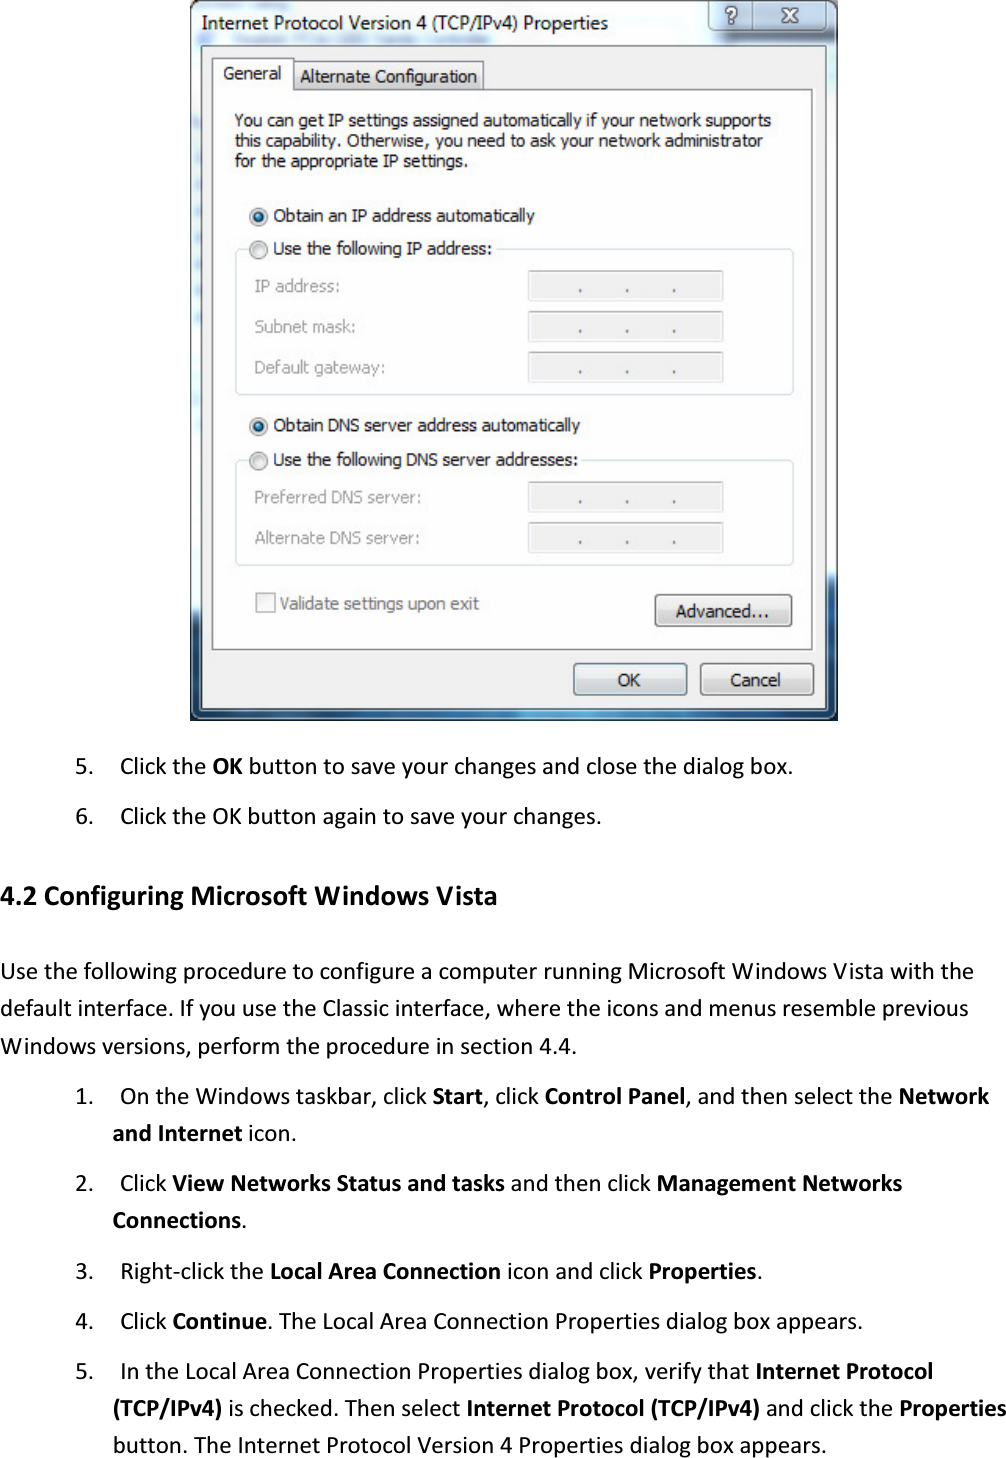  5. Click the OK button to save your changes and close the dialog box. 6. Click the OK button again to save your changes. 4.2 Configuring Microsoft Windows Vista Use the following procedure to configure a computer running Microsoft Windows Vista with the default interface. If you use the Classic interface, where the icons and menus resemble previous Windows versions, perform the procedure in section 4.4. 1. On the Windows taskbar, click Start, click Control Panel, and then select the Network and Internet icon. 2. Click View Networks Status and tasks and then click Management Networks Connections. 3. Right-click the Local Area Connection icon and click Properties. 4. Click Continue. The Local Area Connection Properties dialog box appears. 5. In the Local Area Connection Properties dialog box, verify that Internet Protocol (TCP/IPv4) is checked. Then select Internet Protocol (TCP/IPv4) and click the Properties button. The Internet Protocol Version 4 Properties dialog box appears.  